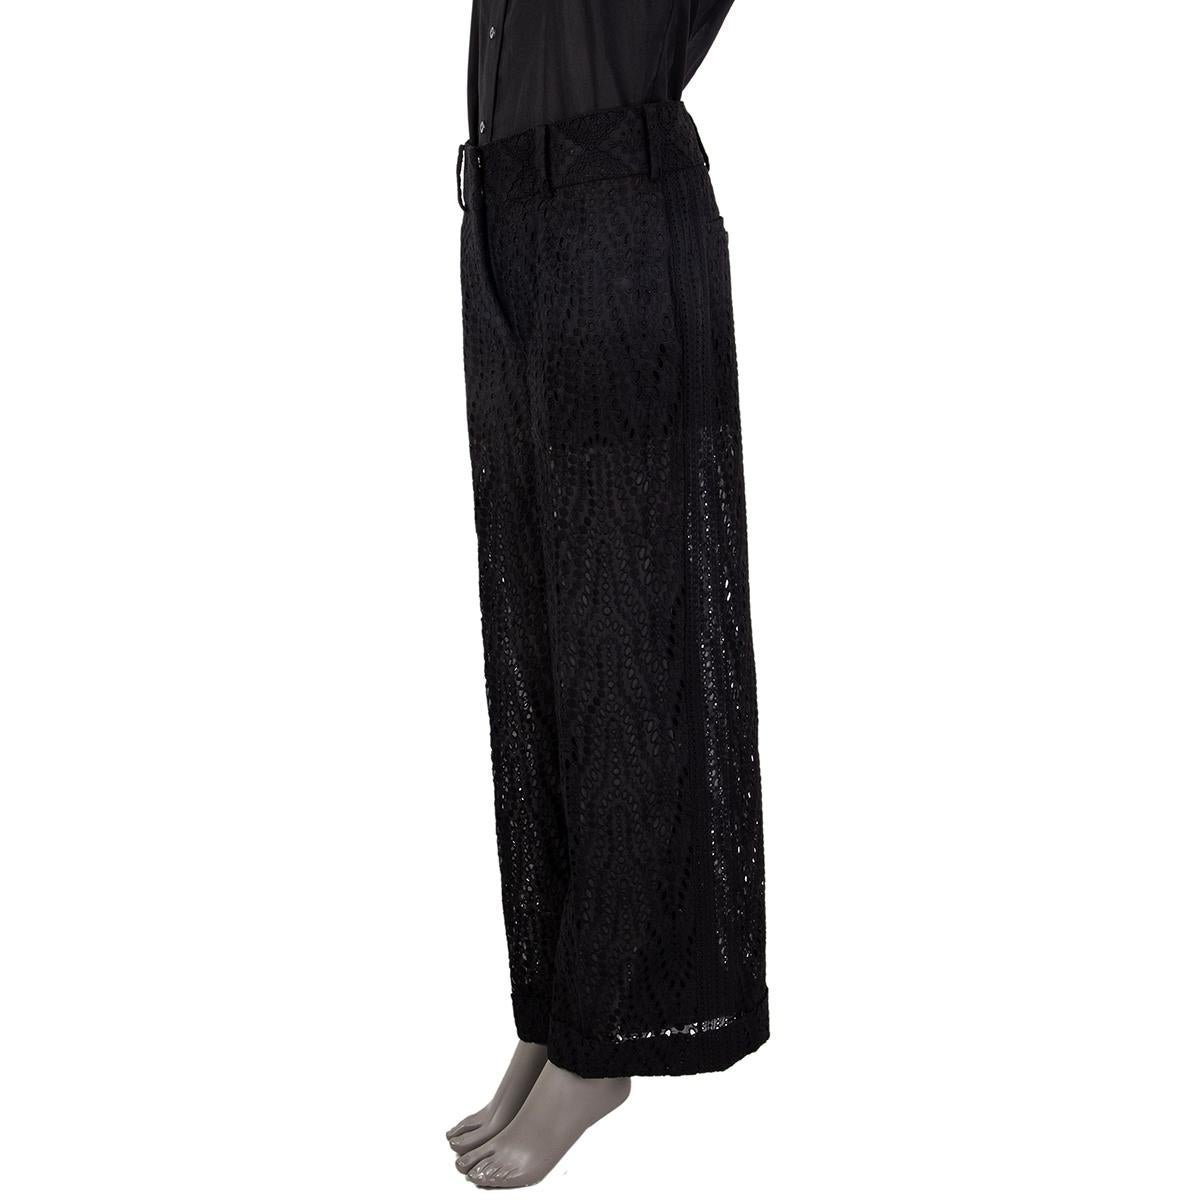 100% authentic Valentino broderie anglaise wide-leg pants in black cotton (93%) and polyester (7%) featuring two slit pockets on the side and on the back. Lined with black shorts in cotton (100%). Have been worn and are in excellent condition.